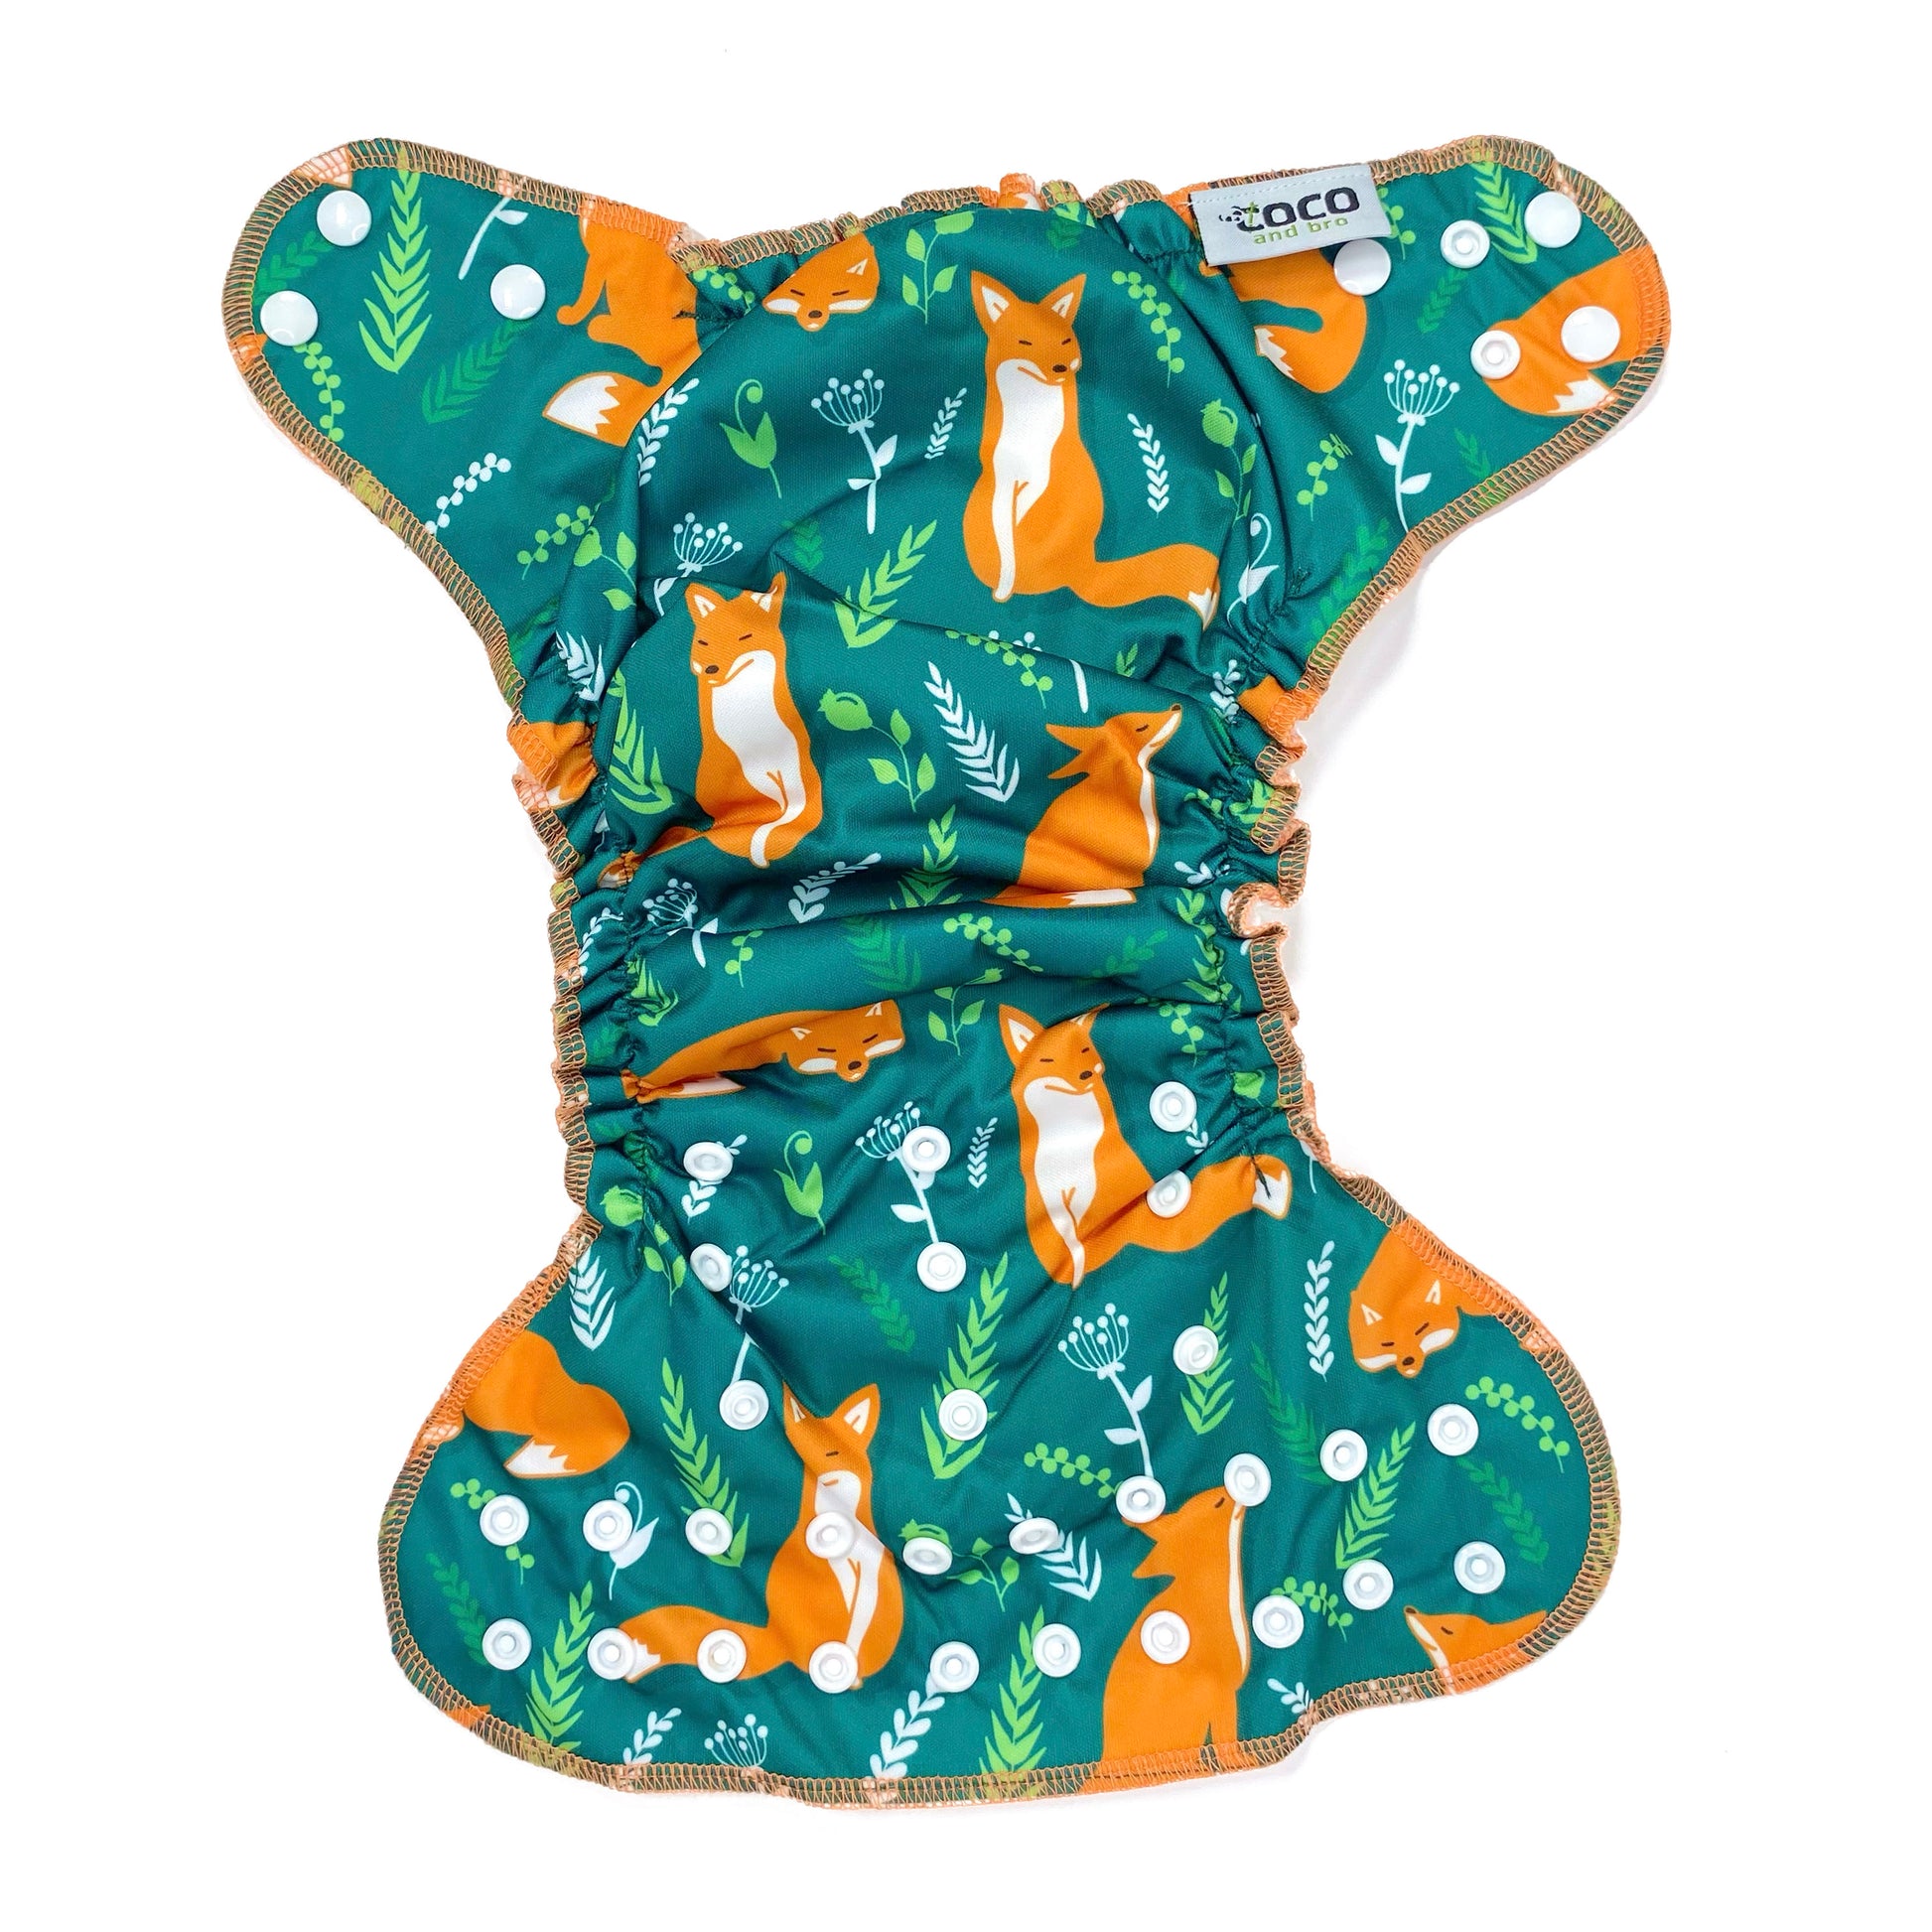 An adjustable reusable nappy for babies and toddlers, featuring a green fox design, with images of foxes on a green background. View shows the full outside pattern of the nappy, with fastenings open.